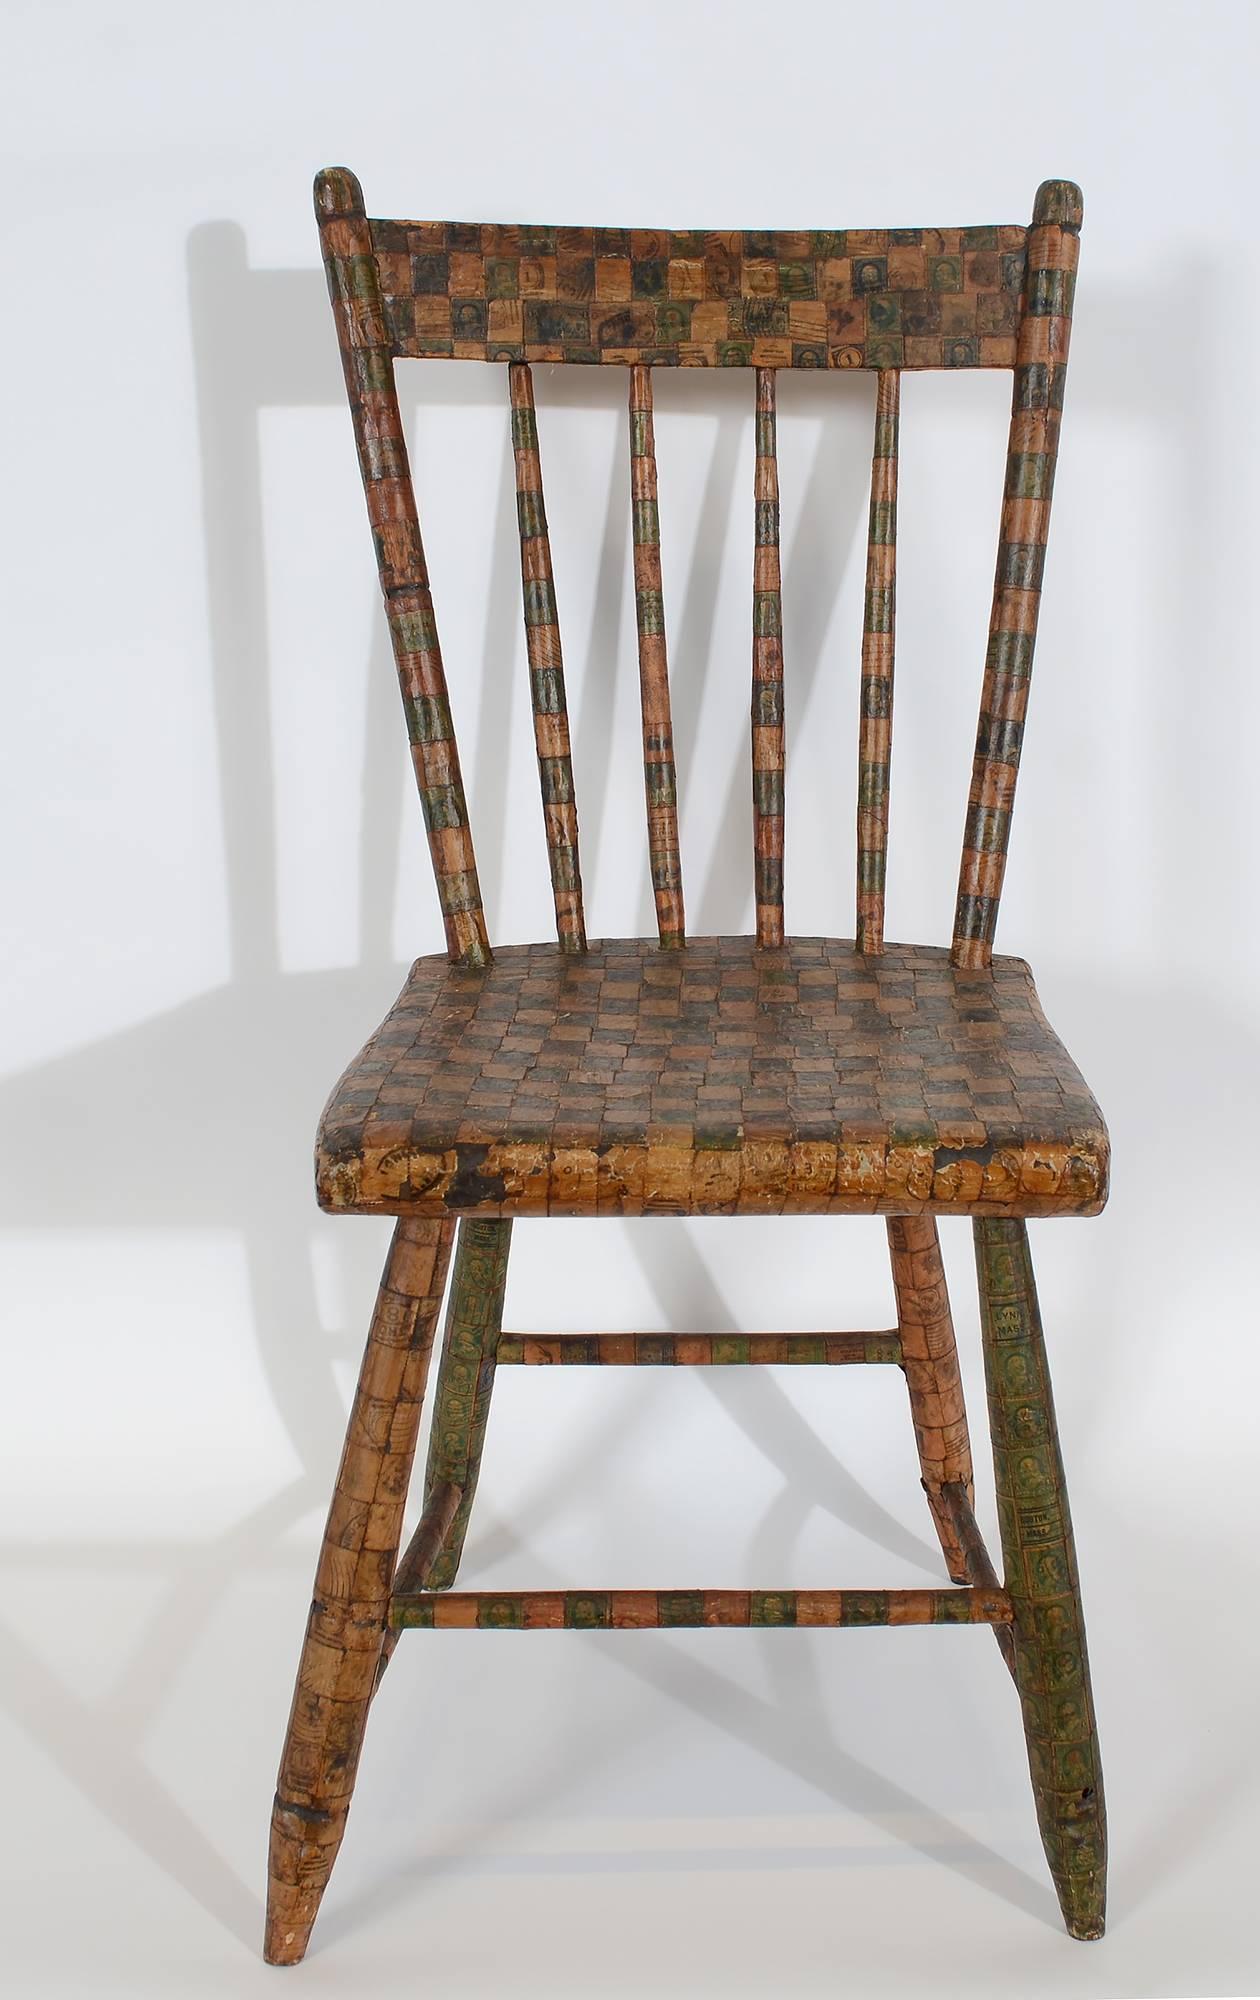 This plank seat side chair has been entirely obsessively decoupaged with American postage stamps. Not being a philatelist, I can only guess that the stamps date to the late 19th century, although the chair itself is earlier. The stamps are mostly 1